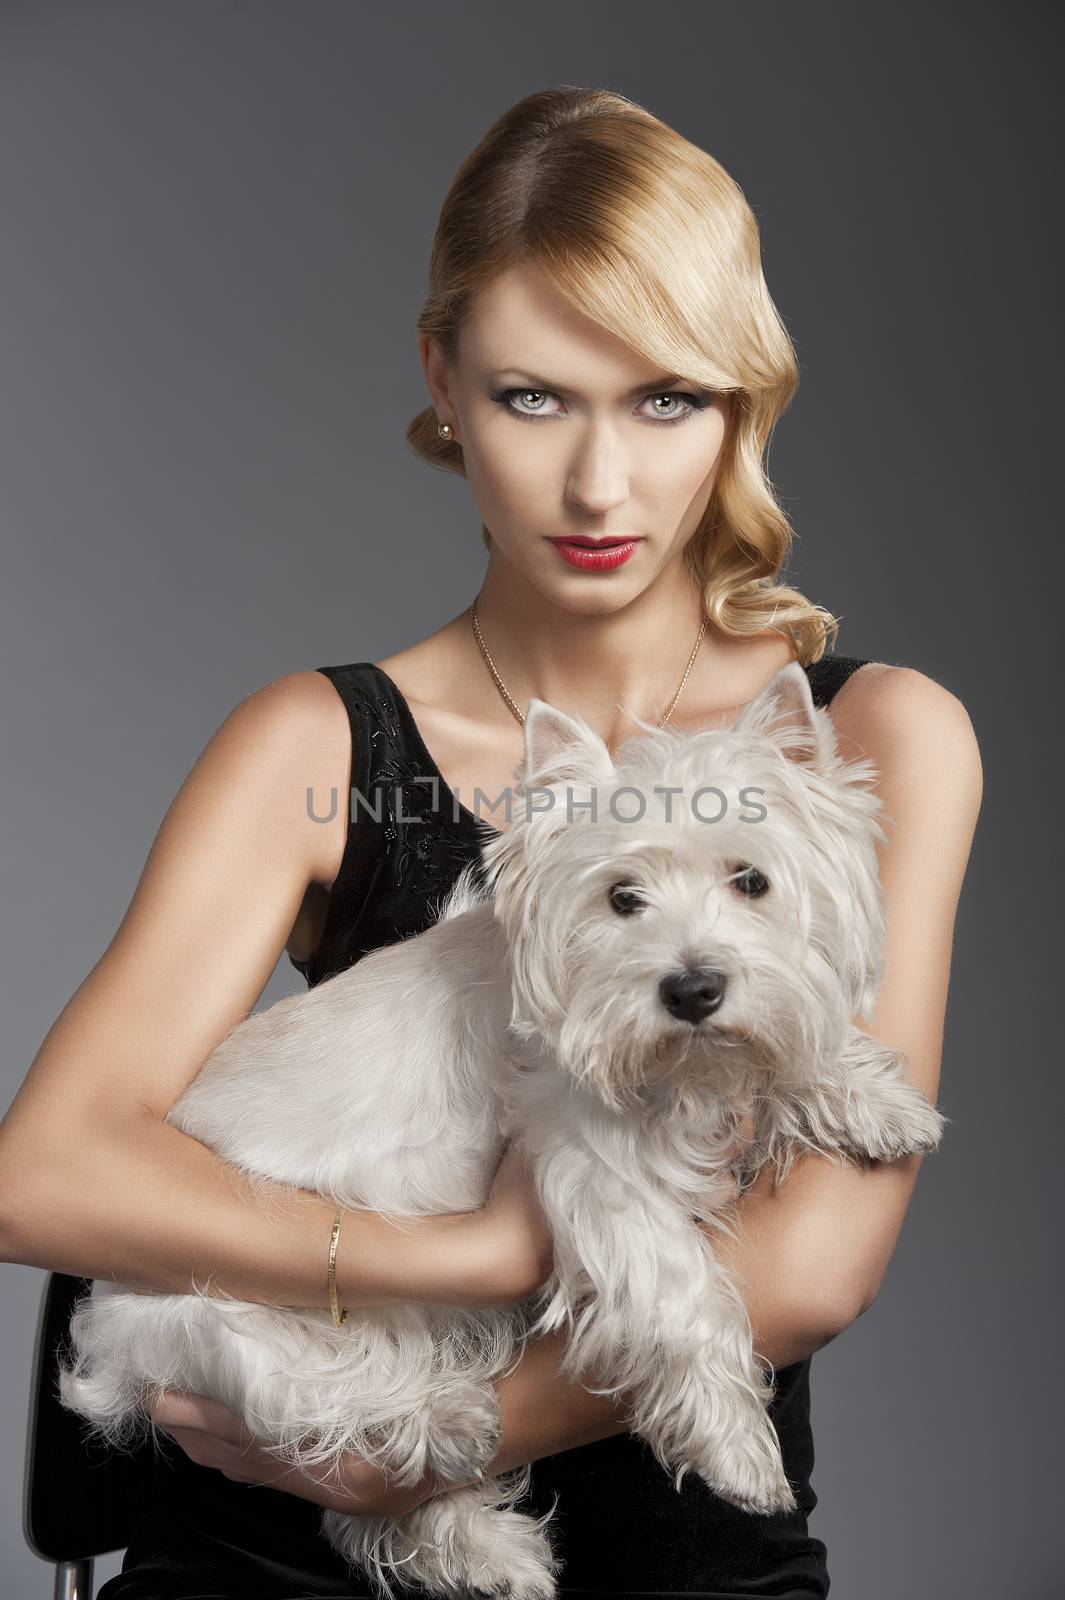 old fashion blond girl,she has a dog in her arms by fotoCD